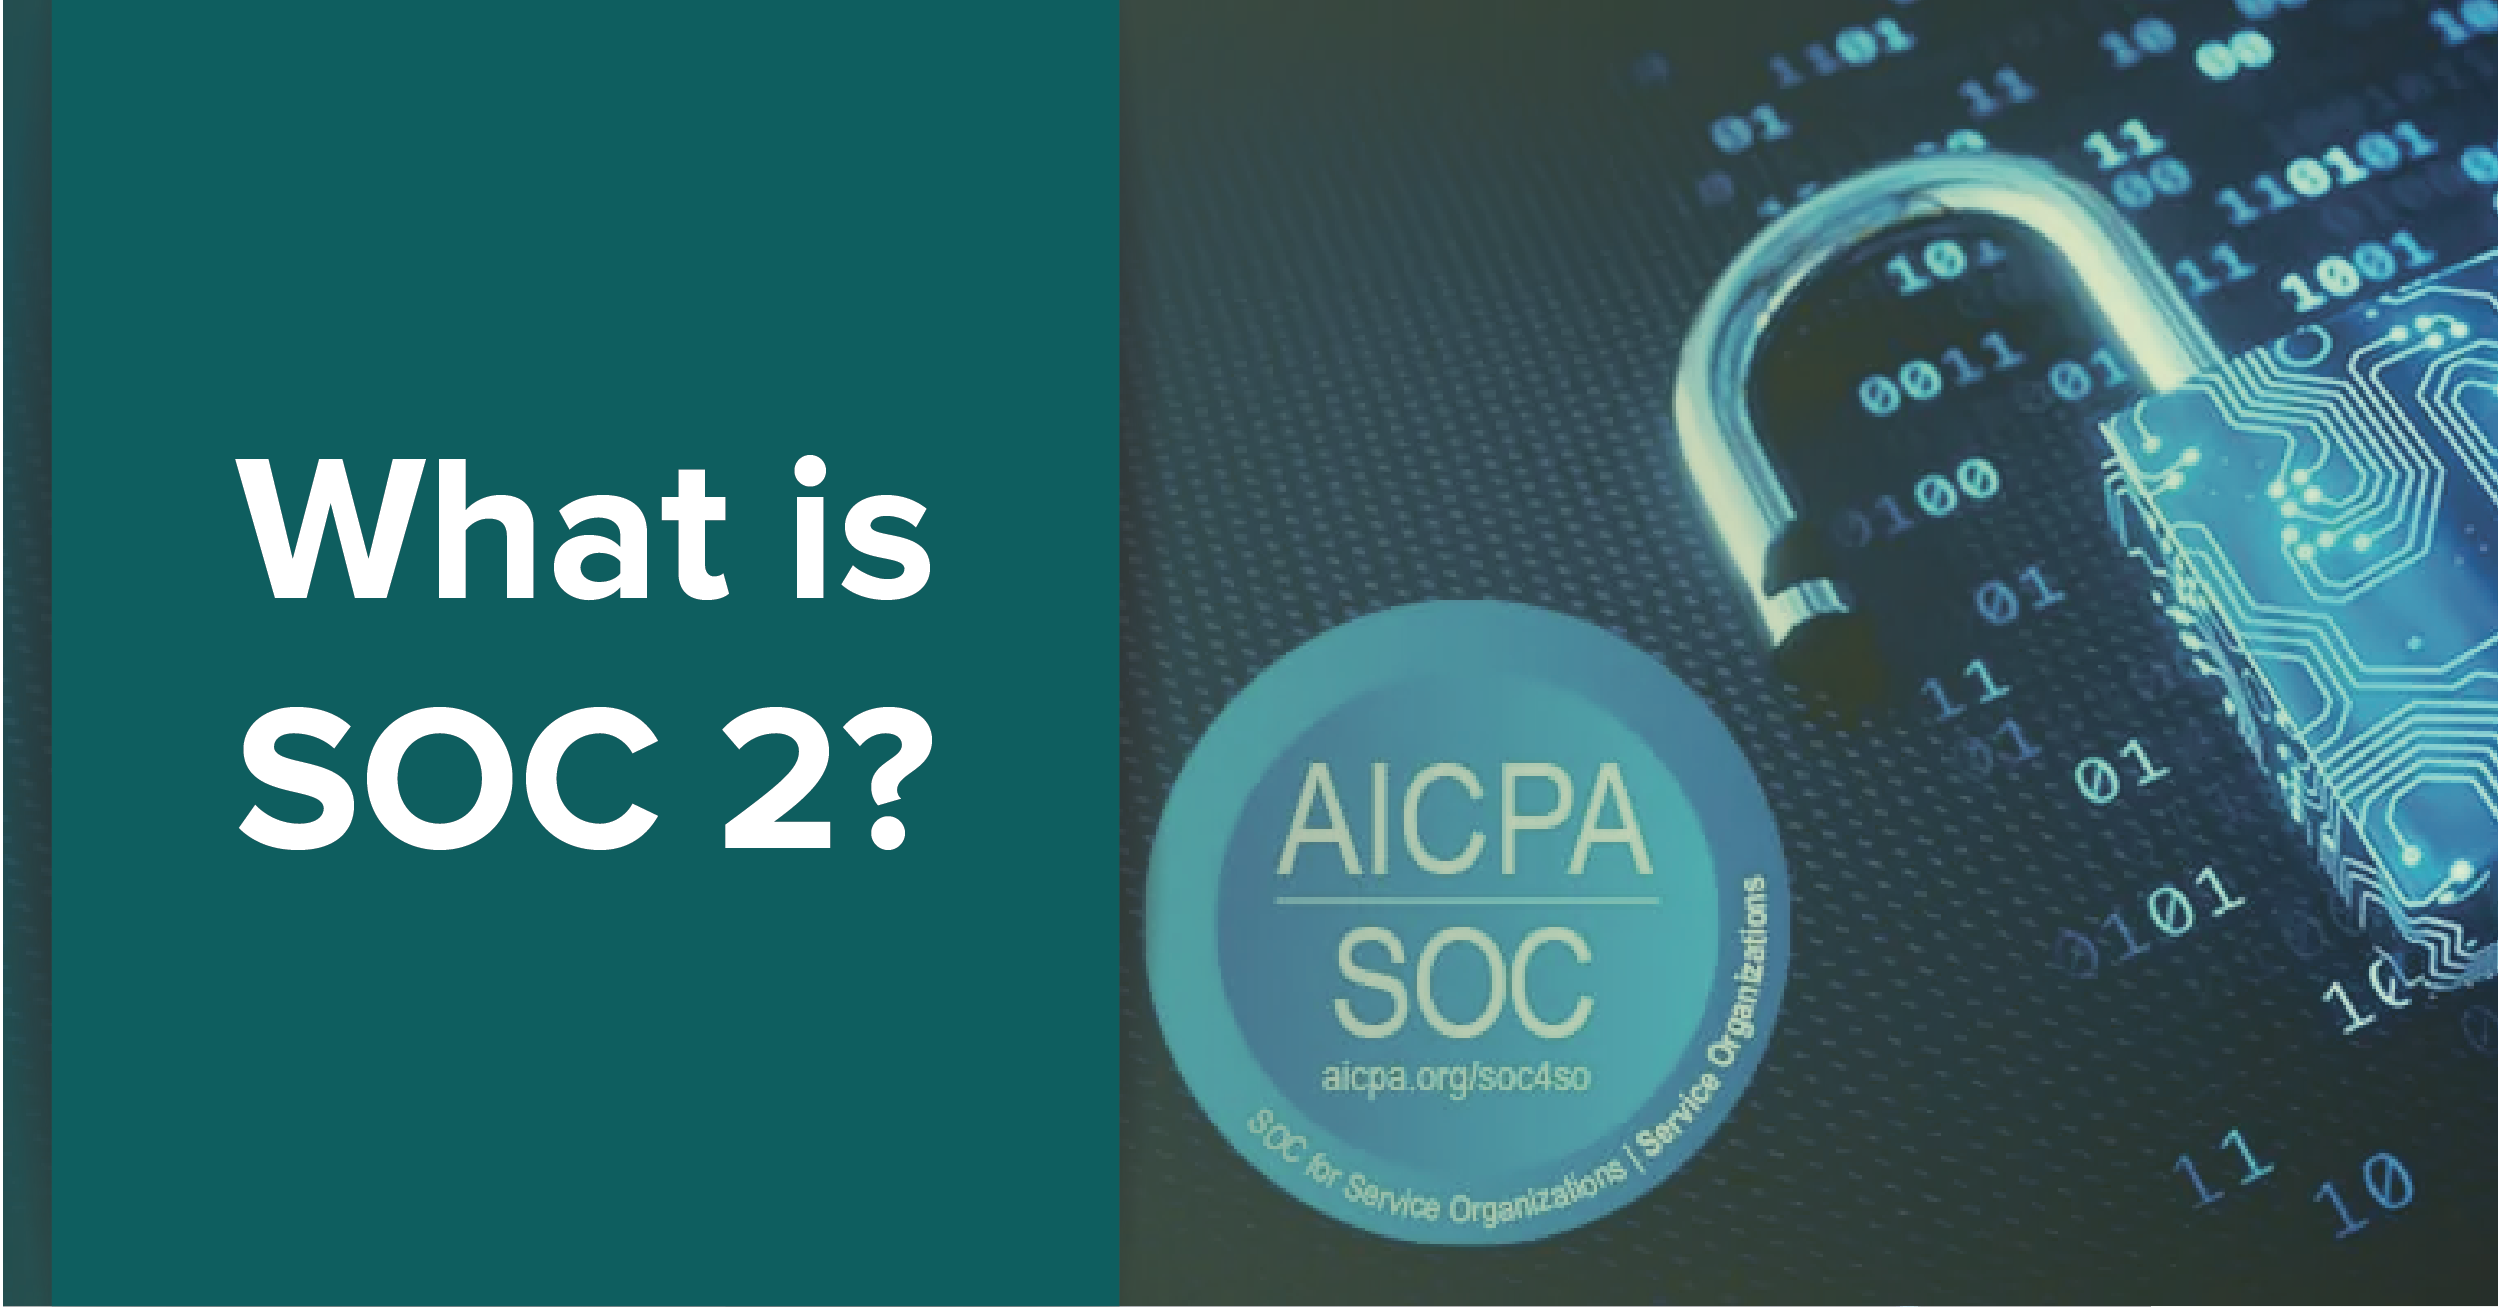 What Is SOC 2?